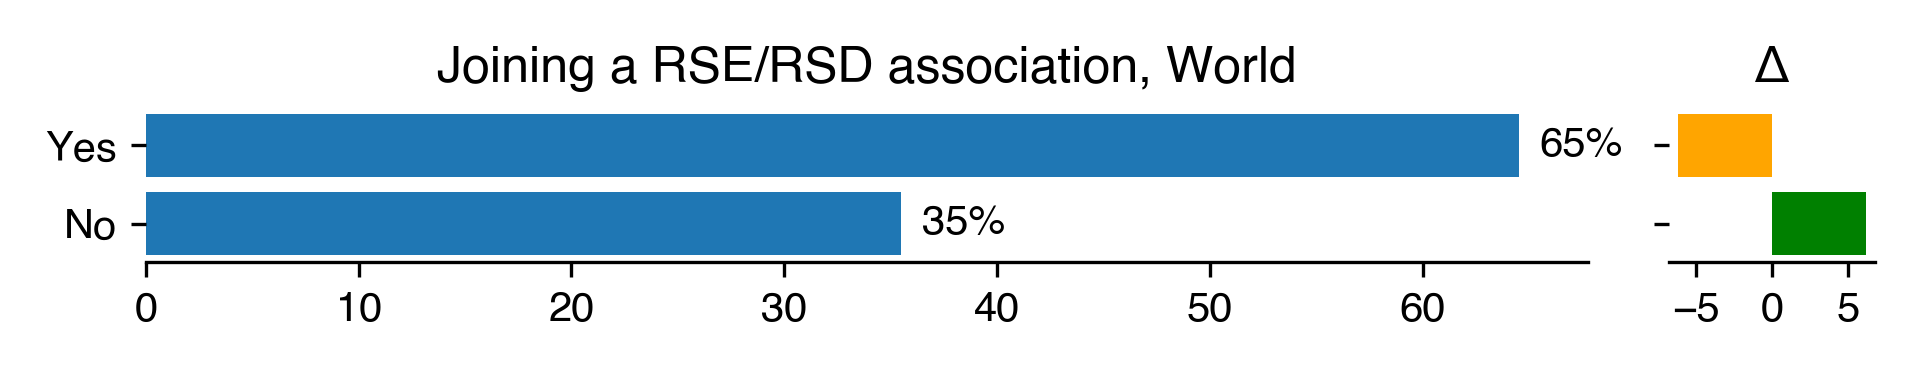 joining-a-rse-rsd-association